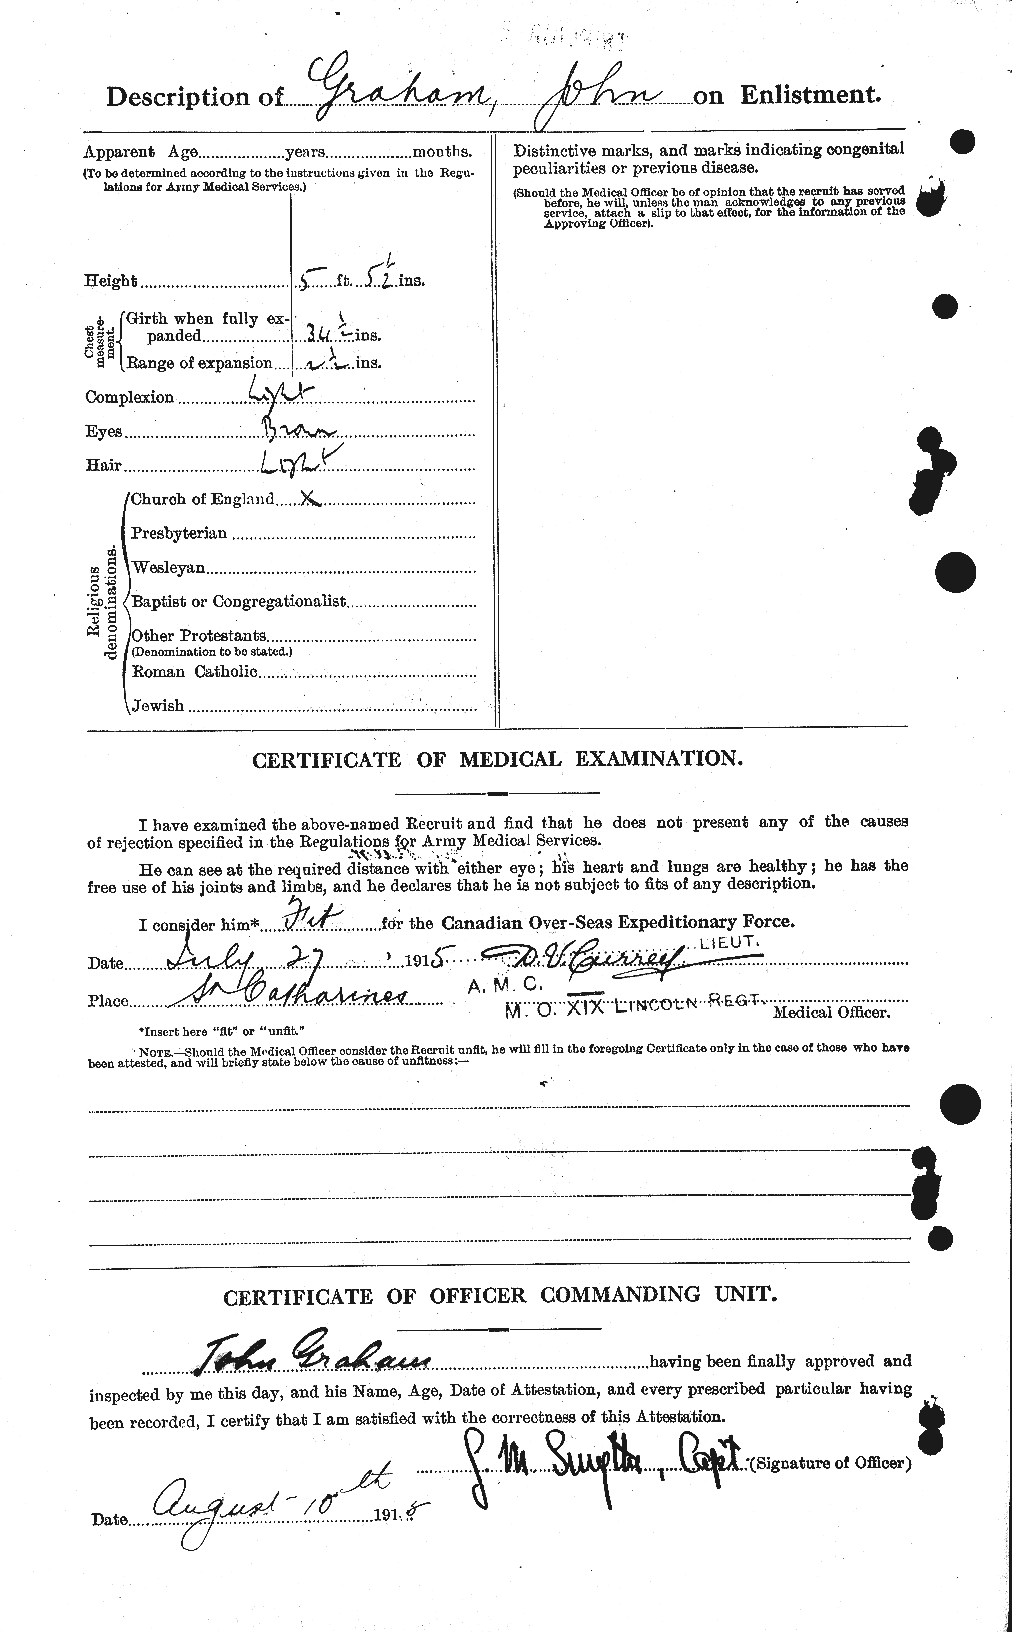 Personnel Records of the First World War - CEF 359118b